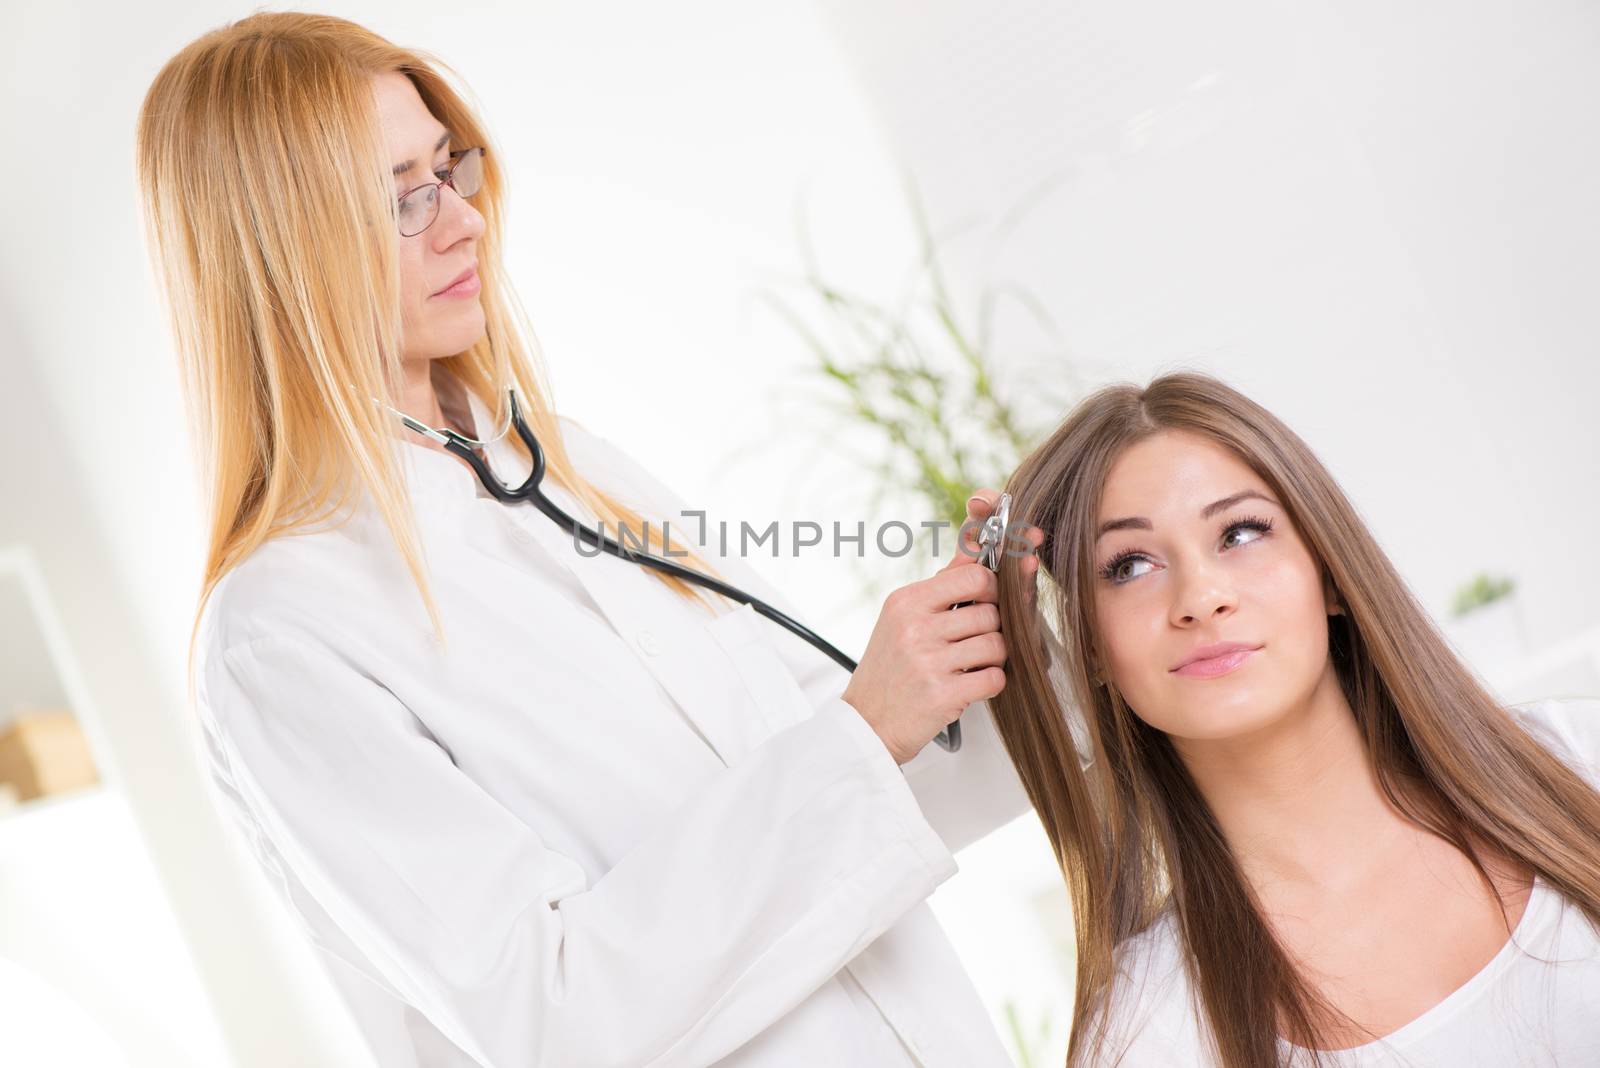 The Hair Doctor by MilanMarkovic78